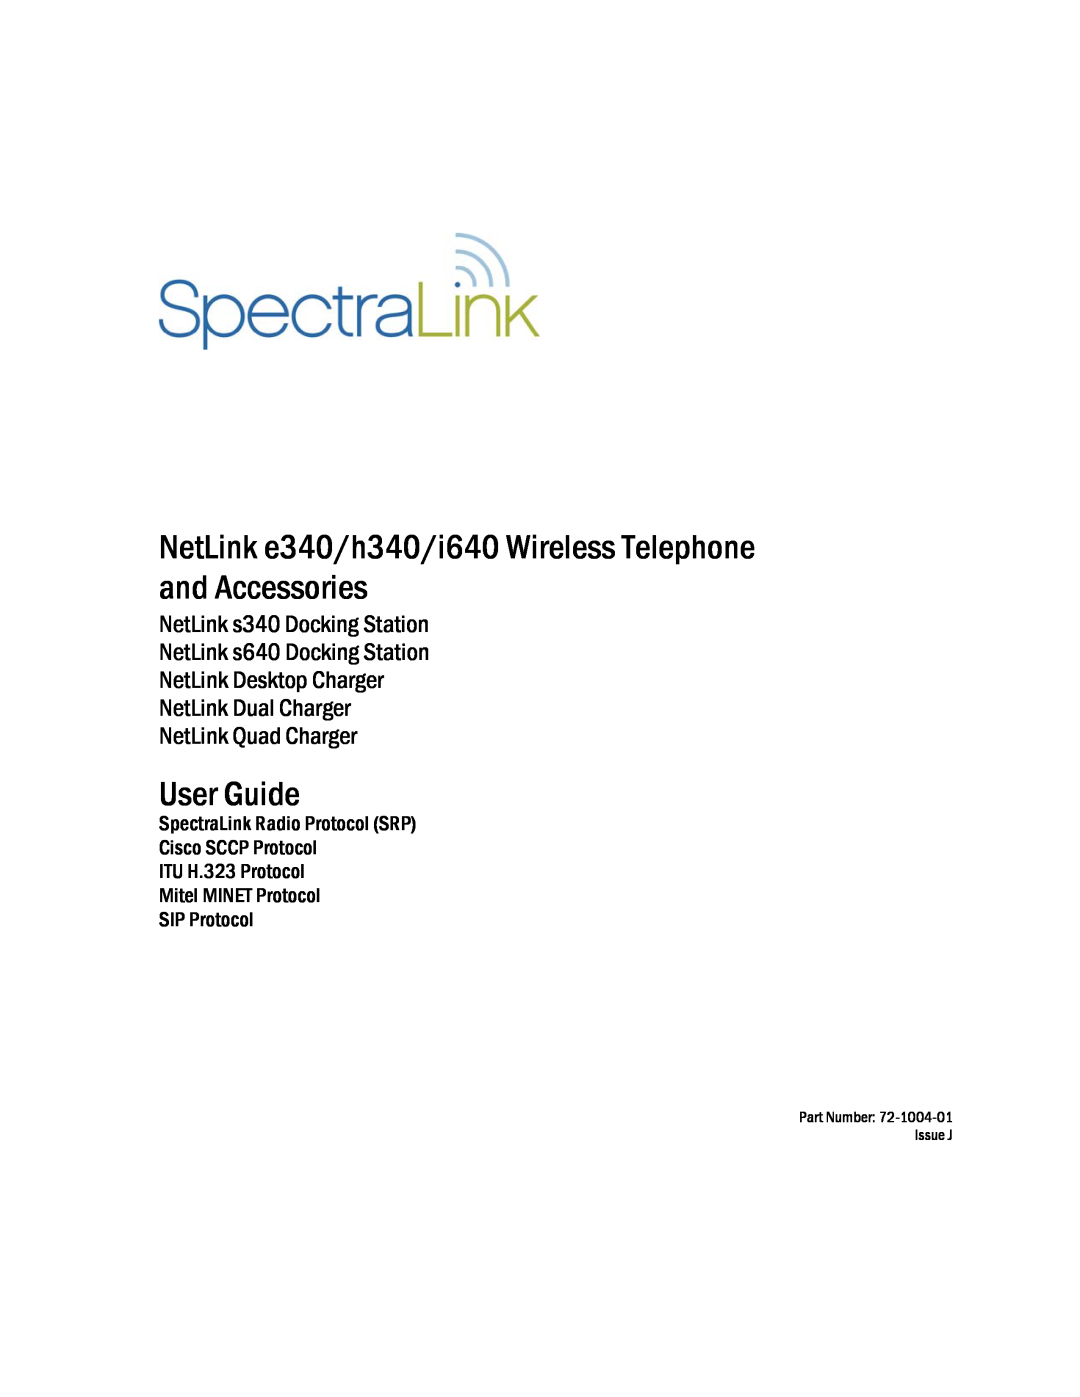 Polycom GCN100, BPX100 manual NetLink e340/h340/i640 Wireless Telephone and Accessories, User Guide, Part Number Issue J 